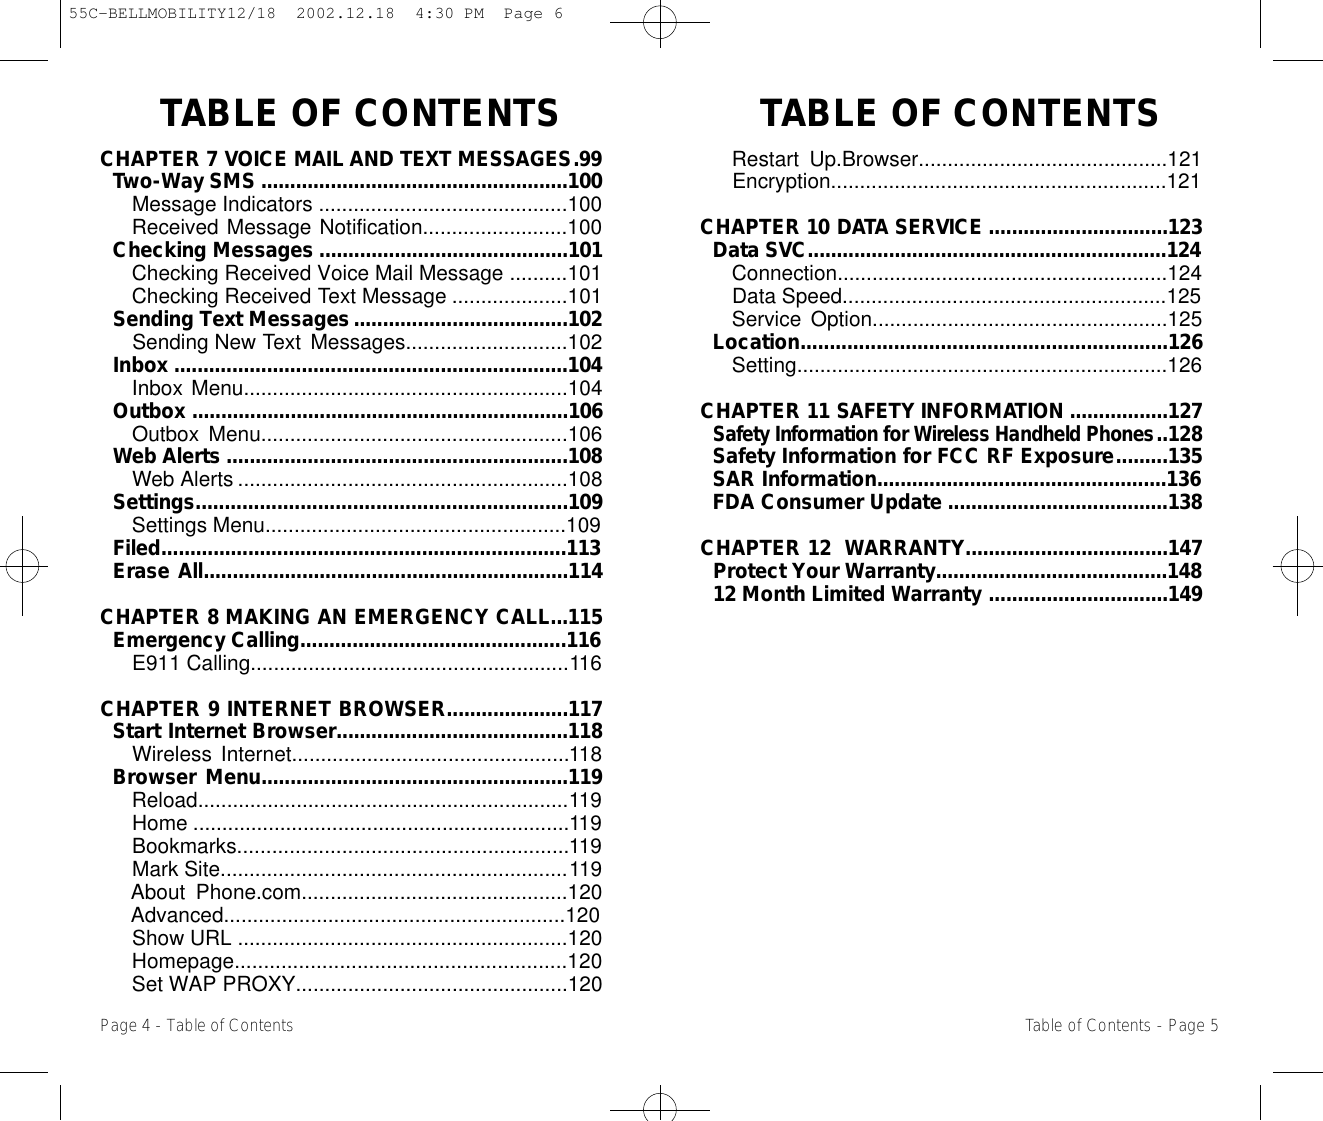 TABLE OF CONTENTSTABLE OF CONTENTSRestart Up.Browser...........................................121Encryption..........................................................121CHAPTER 10 D ATA SERV I C E ...............................123Data SVC..............................................................124Connection.........................................................124Data Speed........................................................125Service Option...................................................125Location...............................................................126Setting................................................................126CHAPTER 11 SAFETY INFORMAT I O N .................127Safety Information for Wireless Handheld Phones..128Safety Information for FCC RF Exposure.........135SAR Information..................................................136FDA Consumer Update ......................................138CHAPTER 12  WARRANTY...................................147Protect Your Warranty........................................14812 Month Limited Warranty ...............................149Page 4 - Table of ContentsCHAPTER 7 VOICE MAIL AND TEXT MESSAGES.99Two-Way SMS .....................................................100Message Indicators ...........................................100Received Message Notification.........................100Checking Messages ...........................................101Checking Received Voice Mail Message ..........101Checking Received Text Message ....................101Sending Text Messages.....................................102Sending New Text Messages............................102Inbox ....................................................................104Inbox Menu........................................................104Outbox .................................................................106Outbox Menu.....................................................106Web Alerts ...........................................................108Web Alerts .........................................................108Settings................................................................109Settings Menu....................................................109Filed......................................................................113Erase All...............................................................114CHAPTER 8 MAKING AN EMERGENCY CALL...115Emergency Calling..............................................116E911 Calling.......................................................116CHAPTER 9 INTERNET BROWSER.....................117Start Internet Browser........................................118Wireless Internet................................................118Browser Menu.....................................................119Reload................................................................119Home .................................................................119Bookmarks.........................................................119Mark Site............................................................119About Phone.com..............................................120Advanced...........................................................120Show URL .........................................................120Homepage.........................................................120Set WAP PROXY...............................................120Table of Contents - Page 555C-BELLMOBILITY12/18  2002.12.18  4:30 PM  Page 6